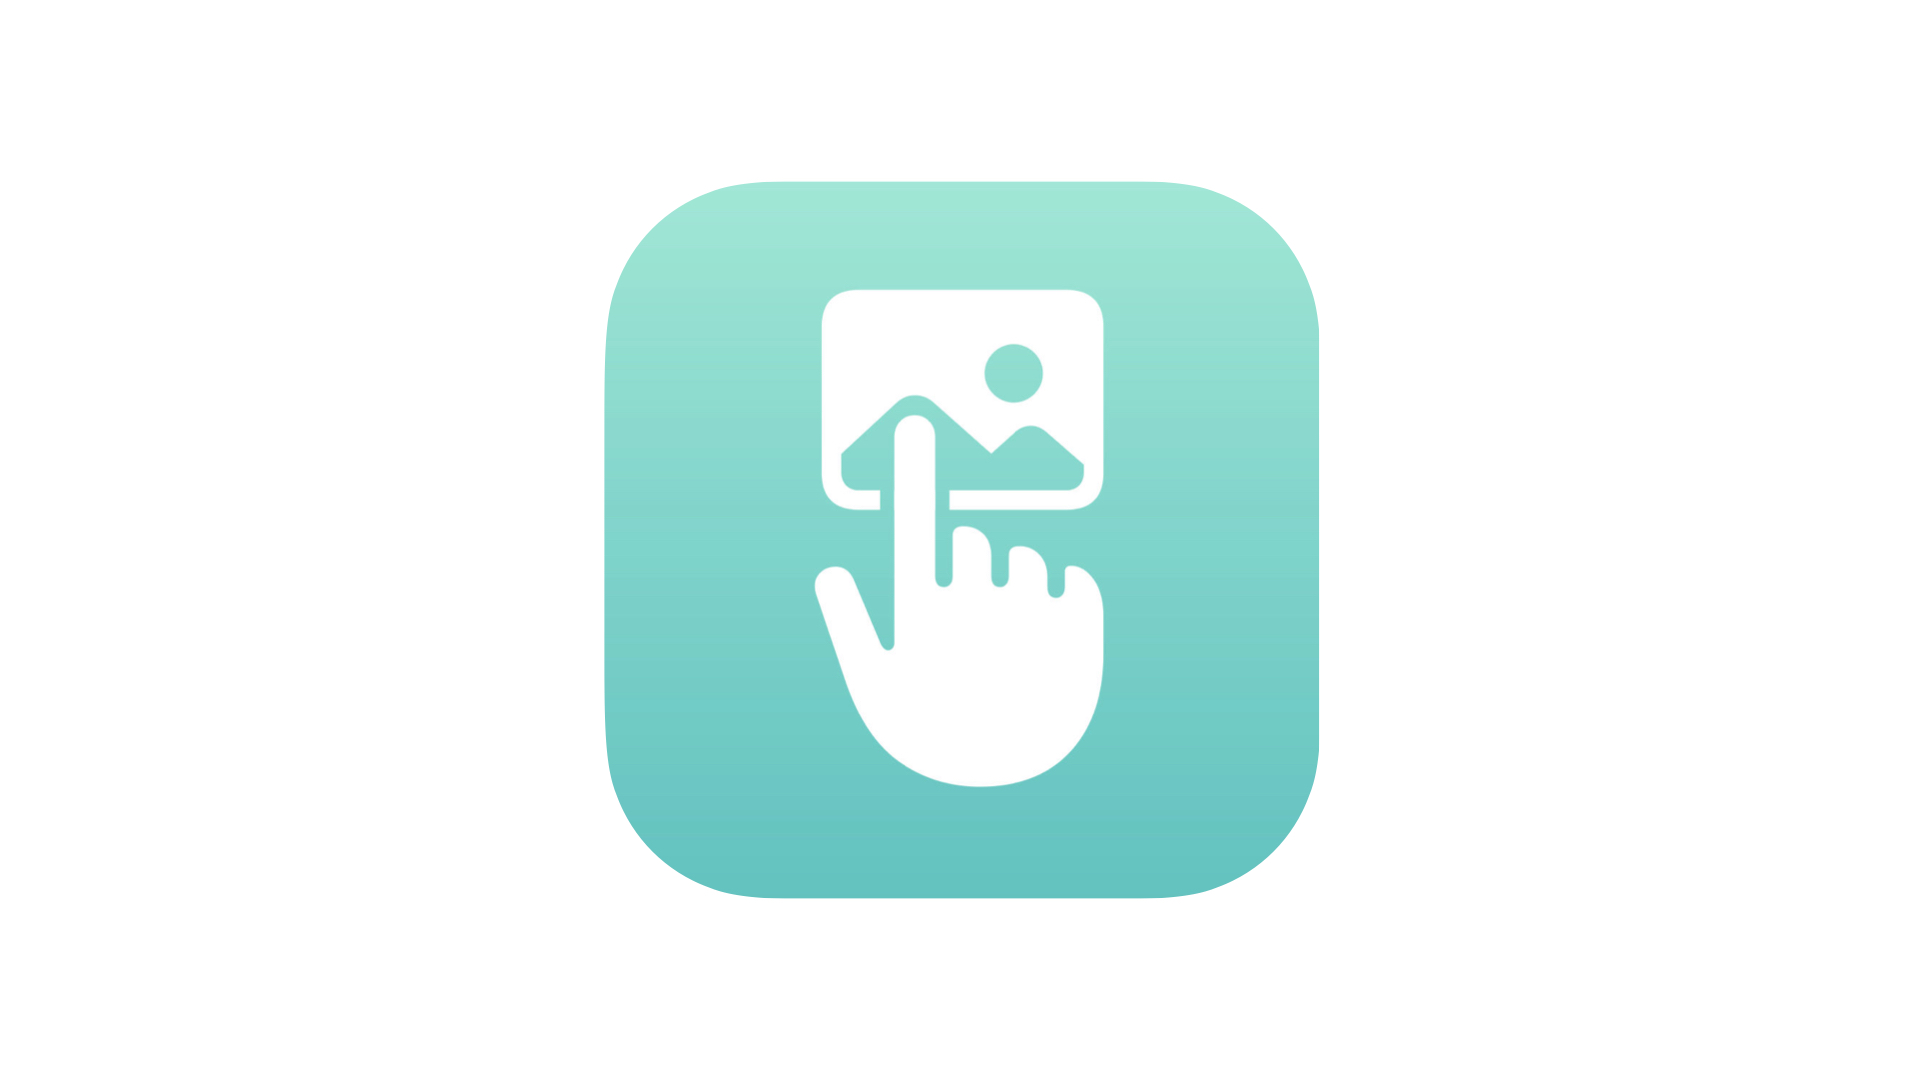 App icon of ImageExplorer, which shows a hand with the index finger touching an image.